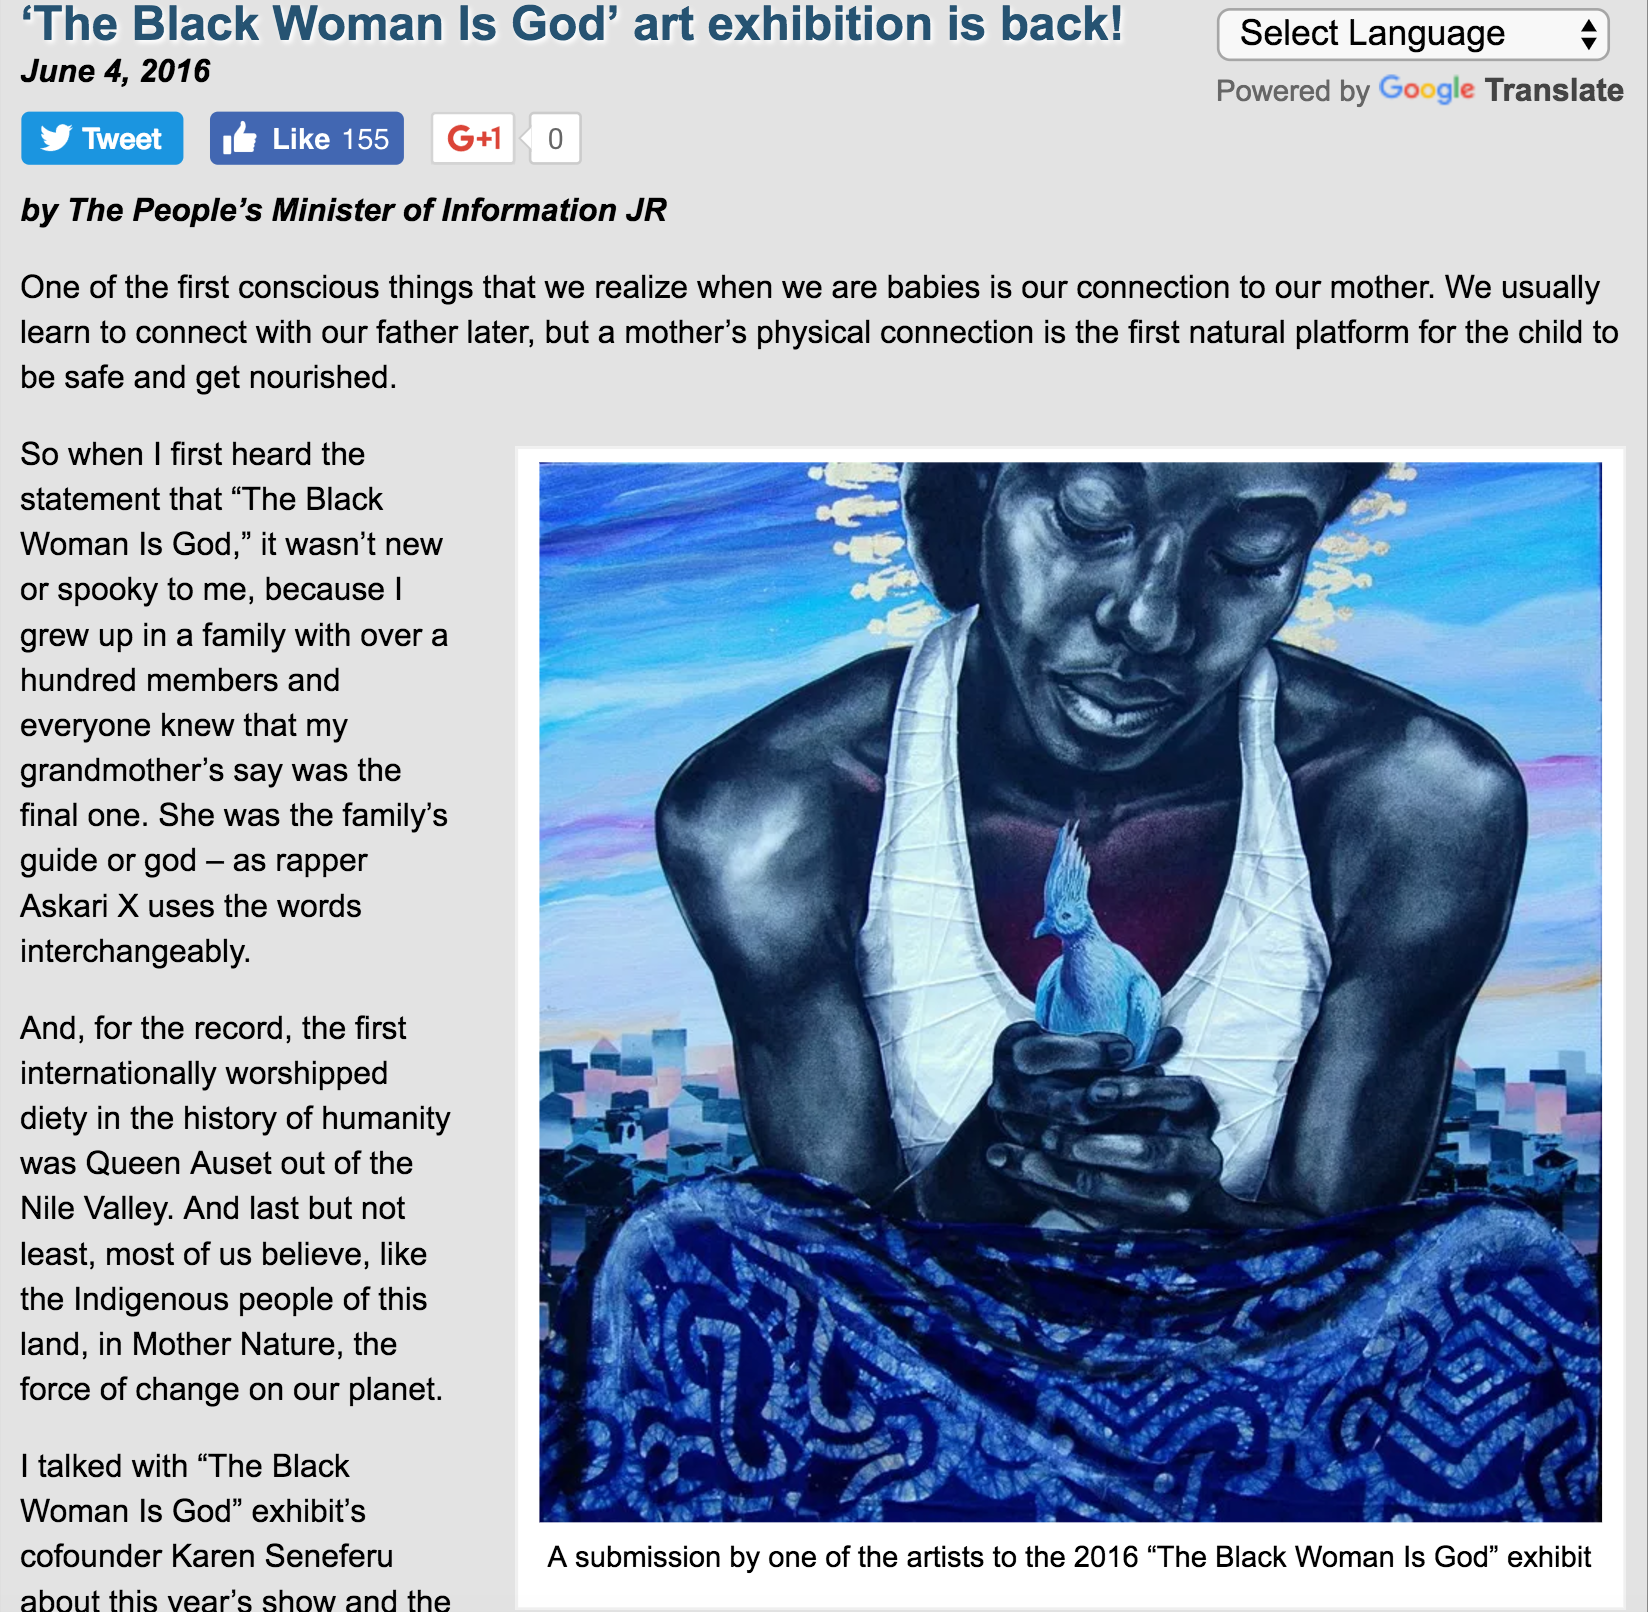 ‘The Black Woman Is God’ art exhibition is back!